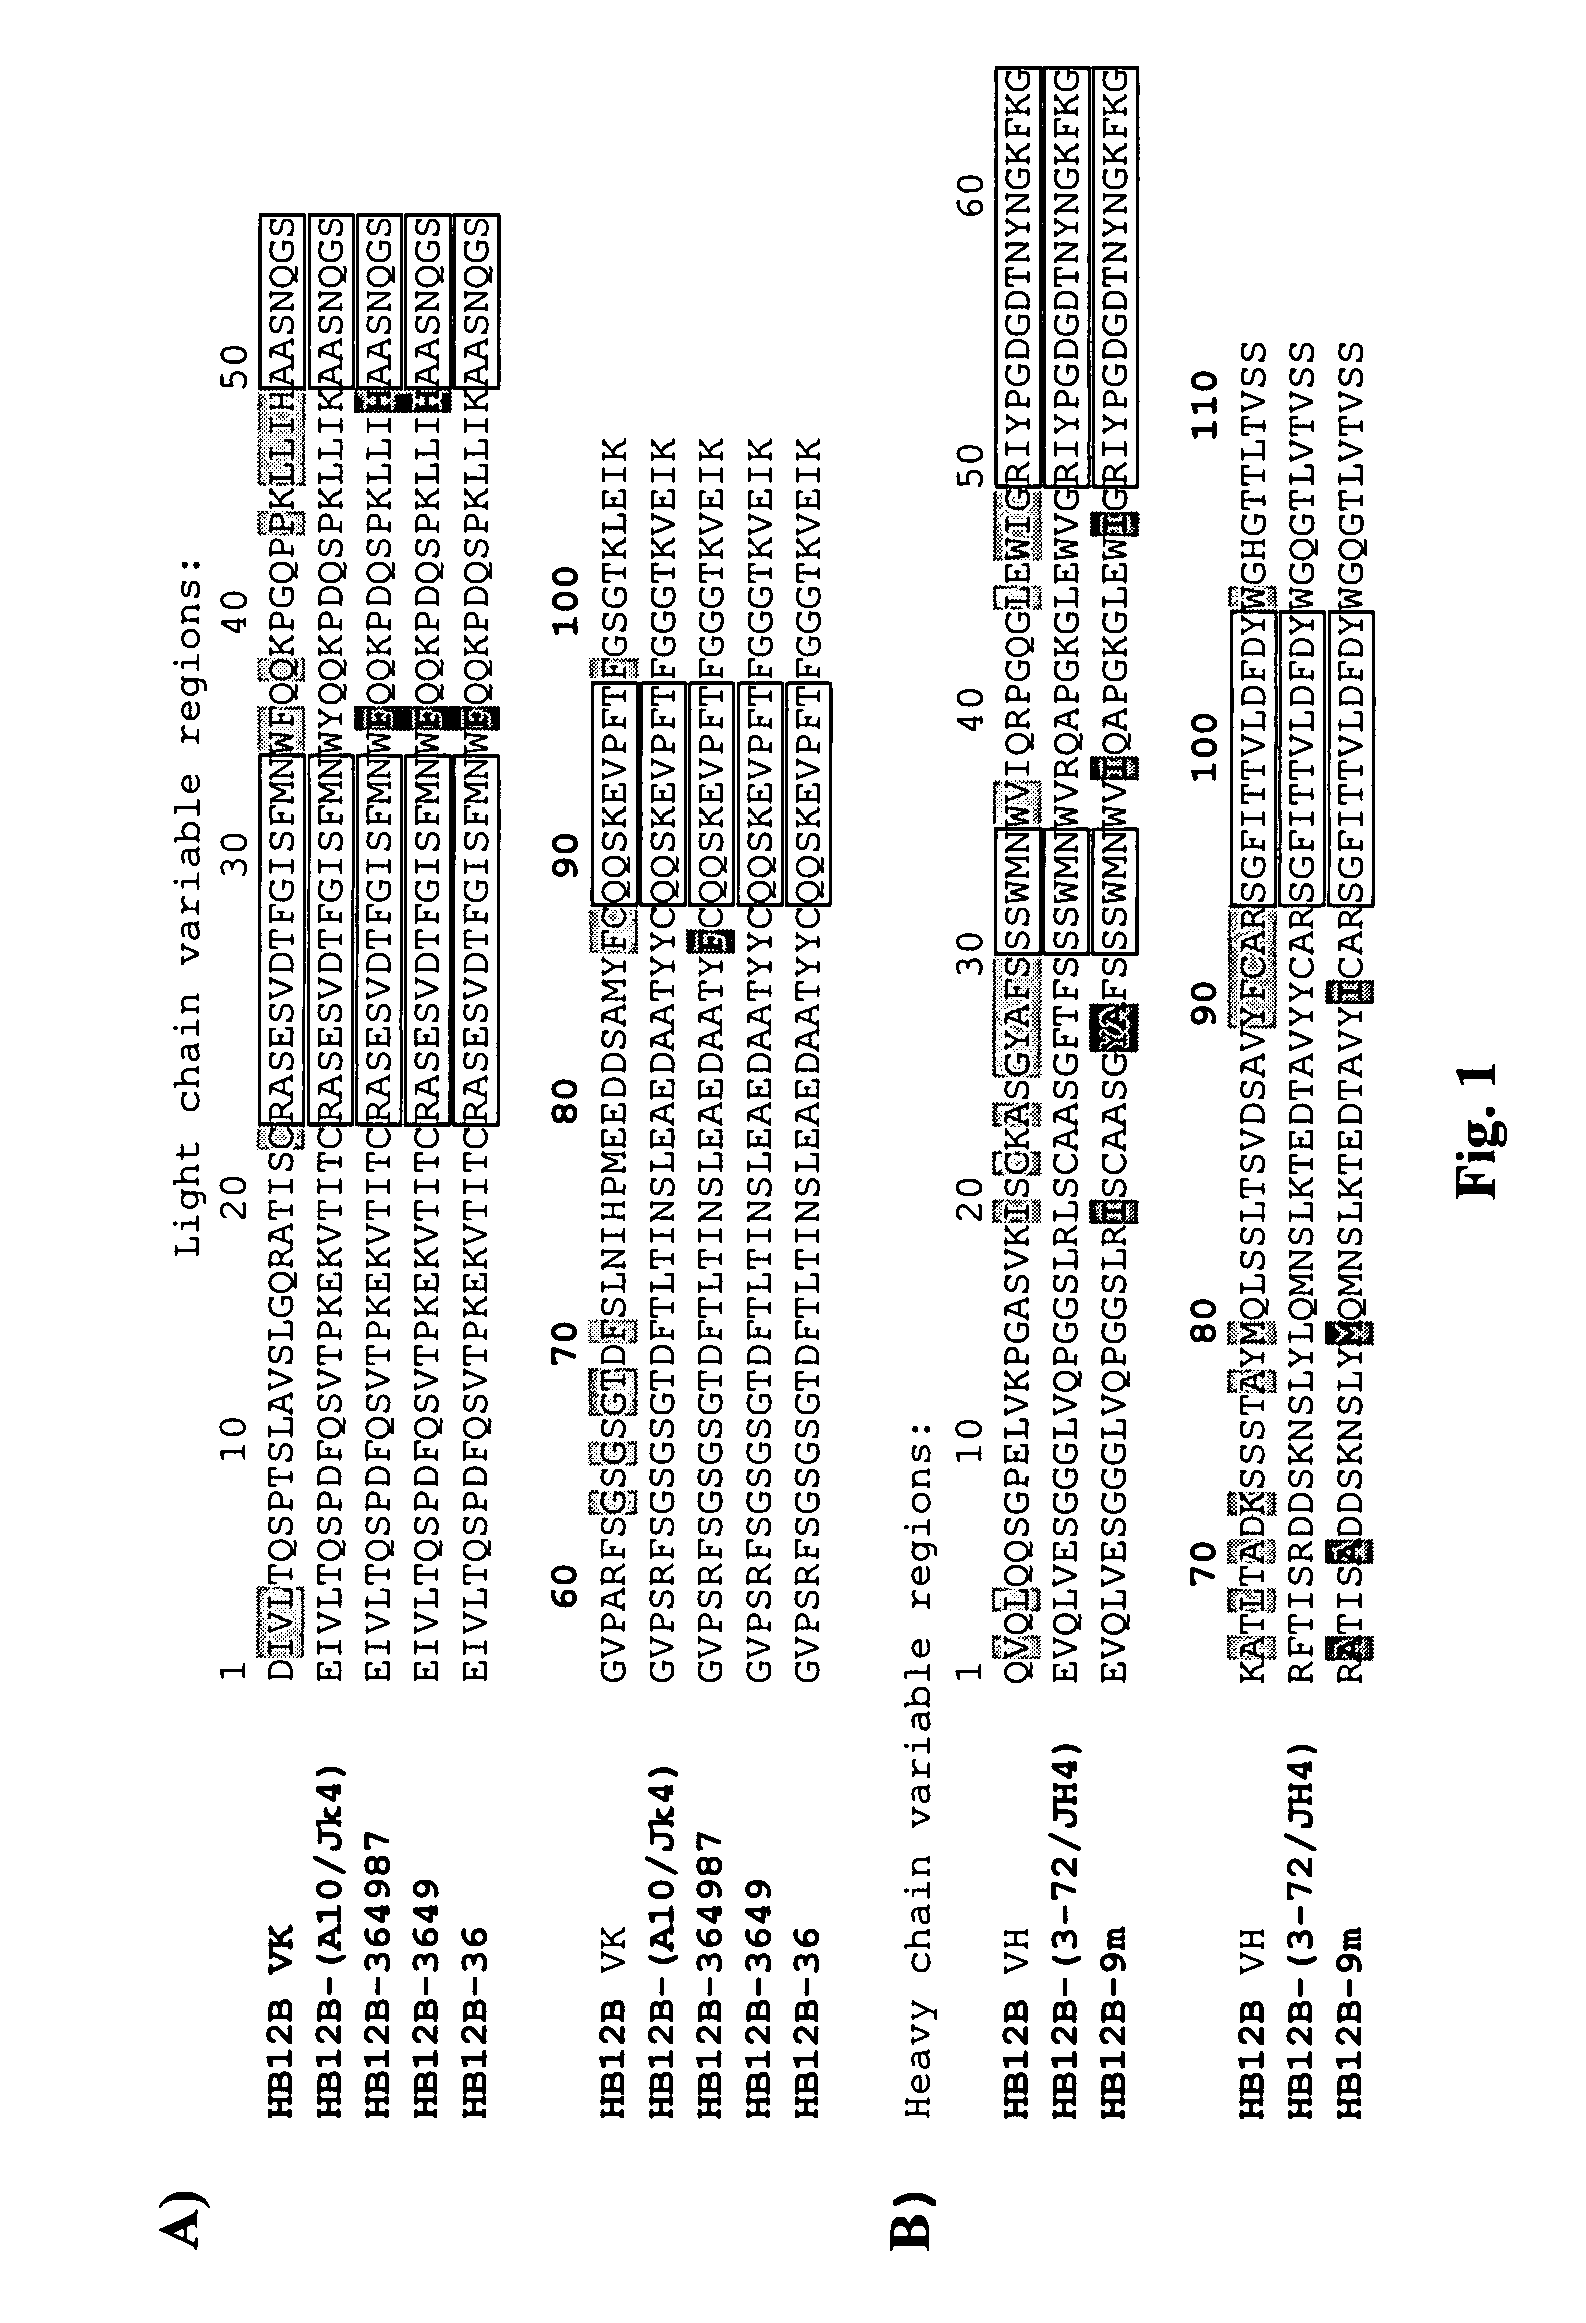 Humanized anti-CD19 antibodies and their use in treatment of oncology, transplantation and autoimmune disease